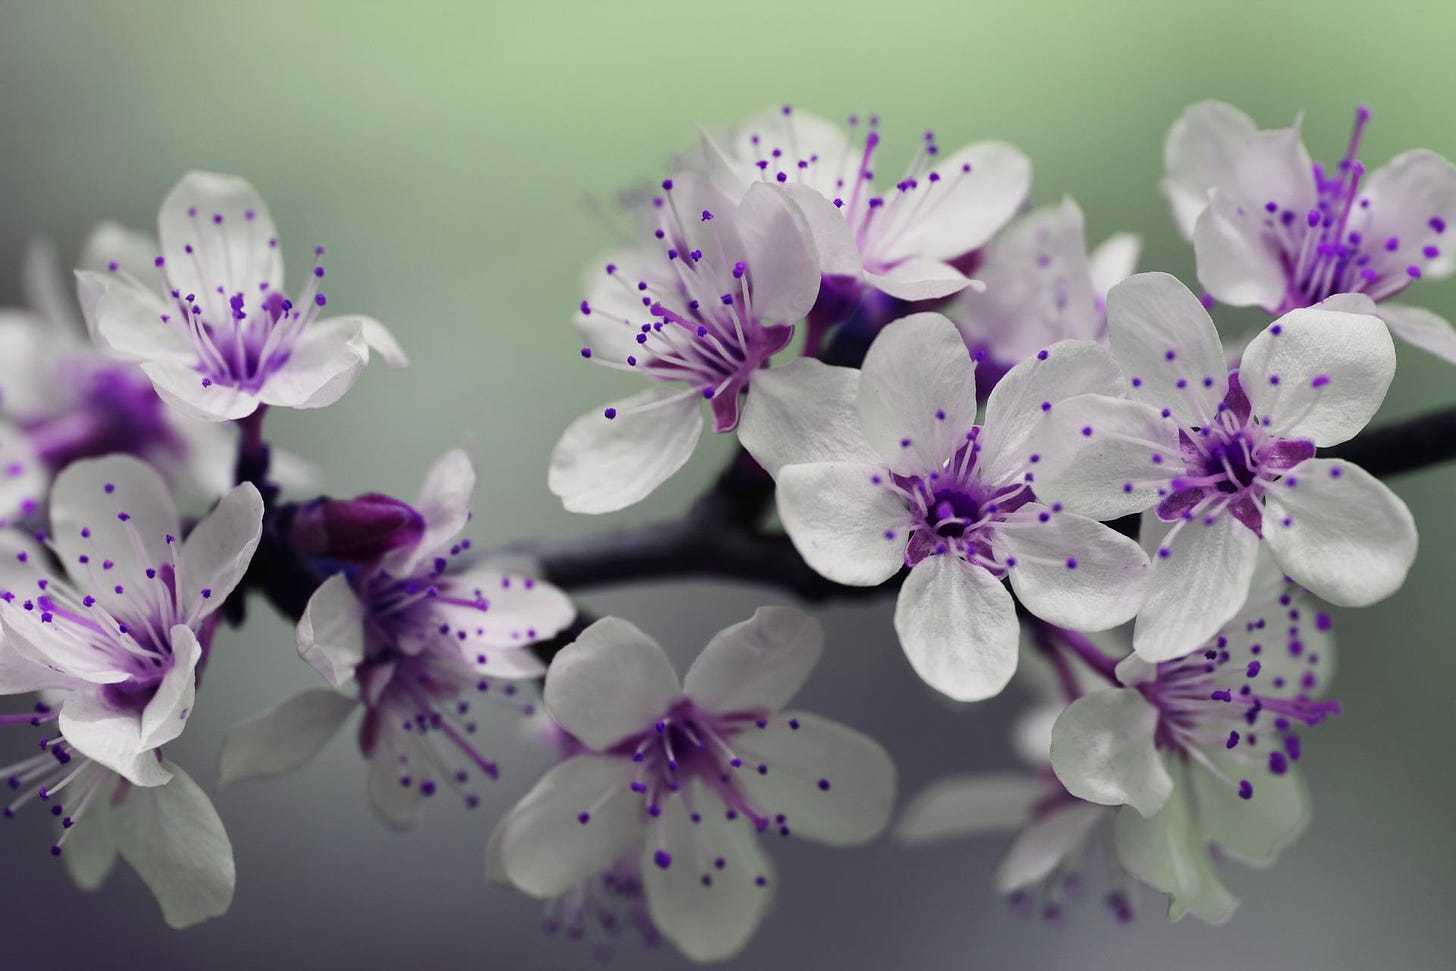 Purple and white flowers on a green background